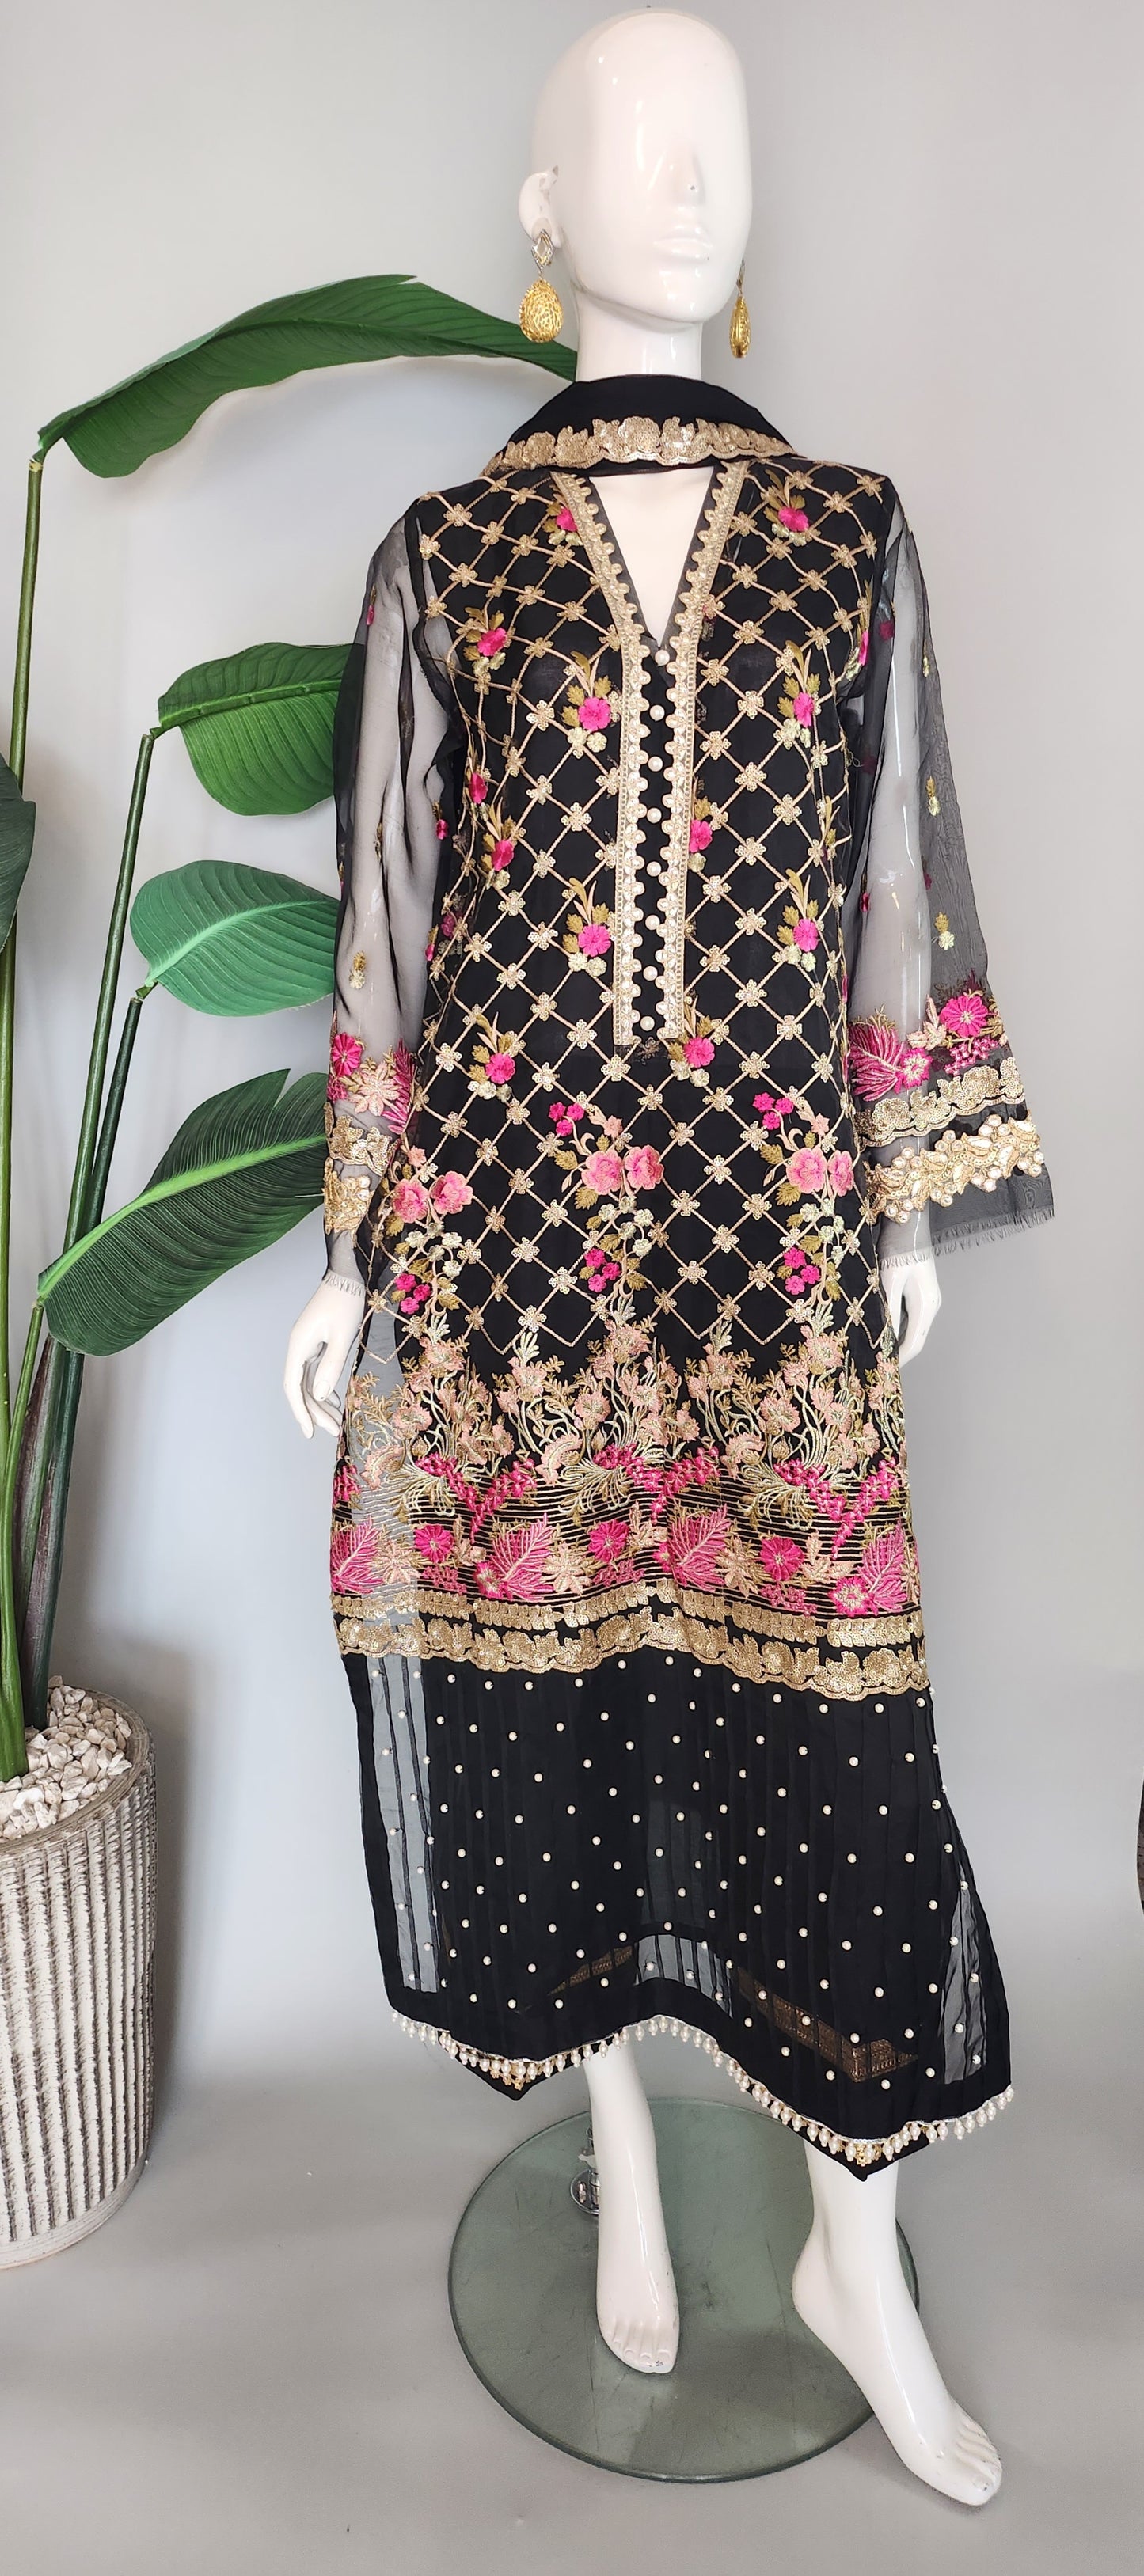 SADAF AHMAD - Black Organza Formal with pink flower embroidery and foil works top + pants + crushed dupatta